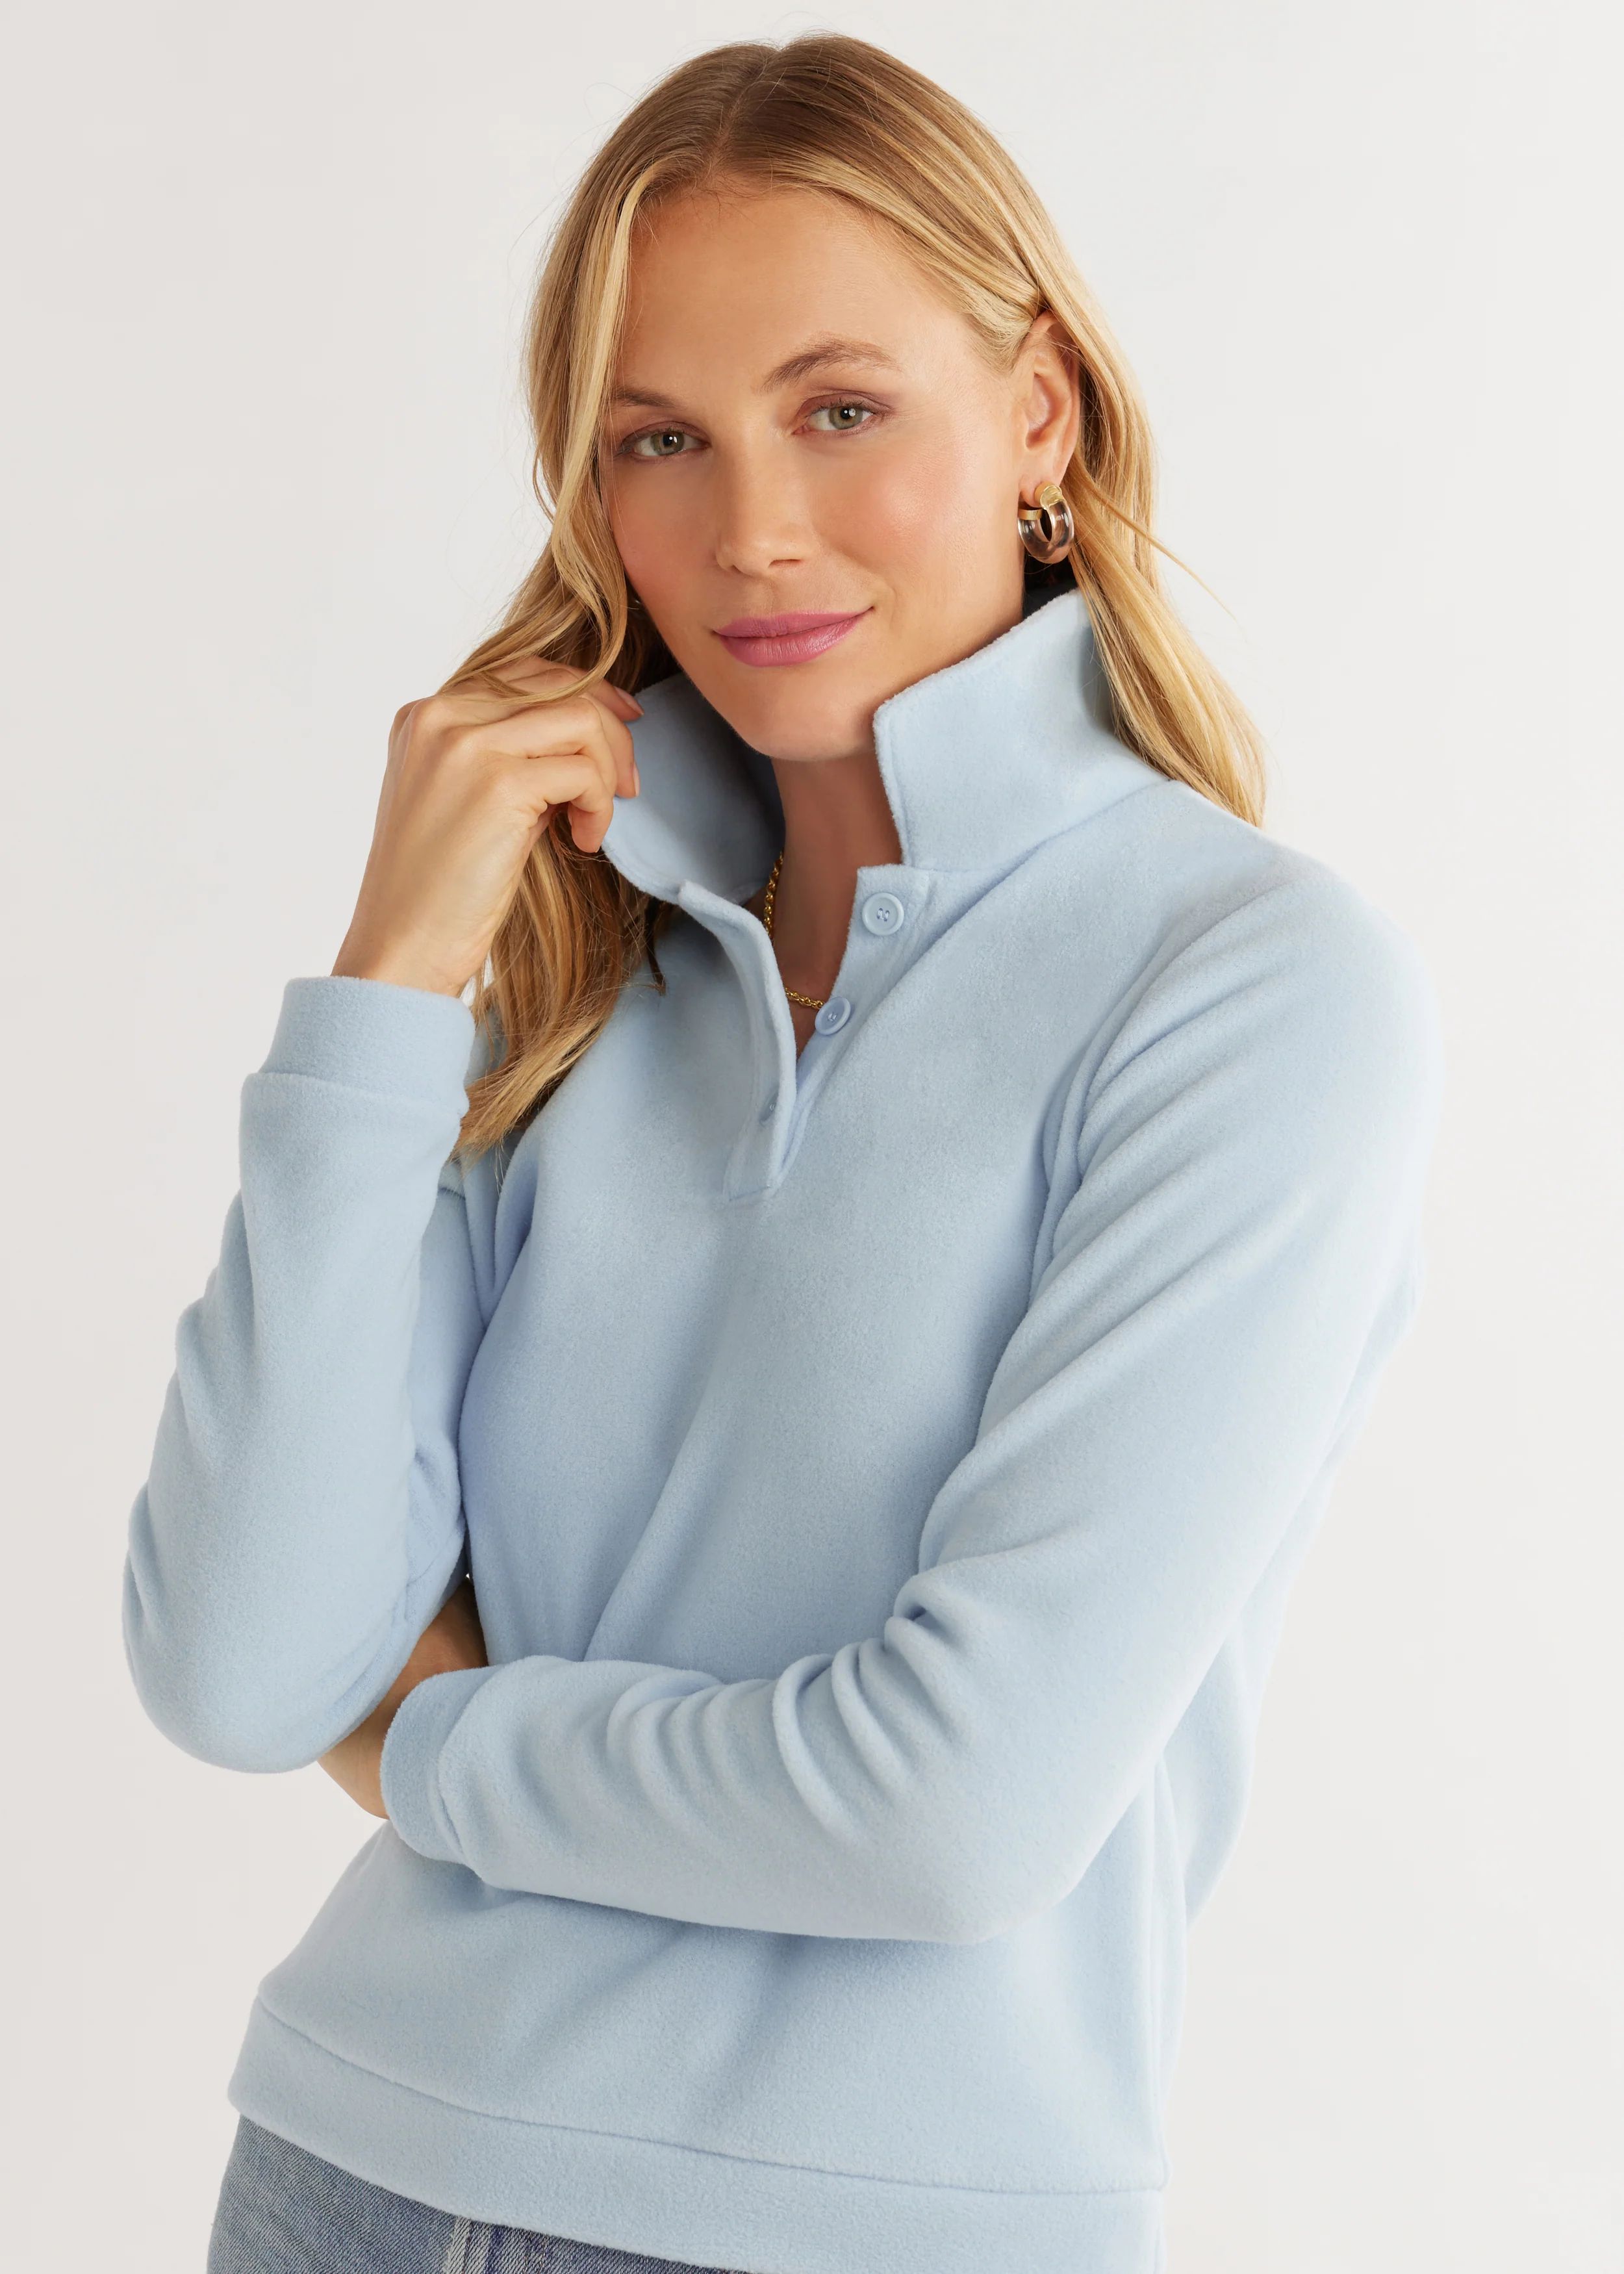 Pear Tree Polo in Vello Fleece (Ice Blue) | Dudley Stephens